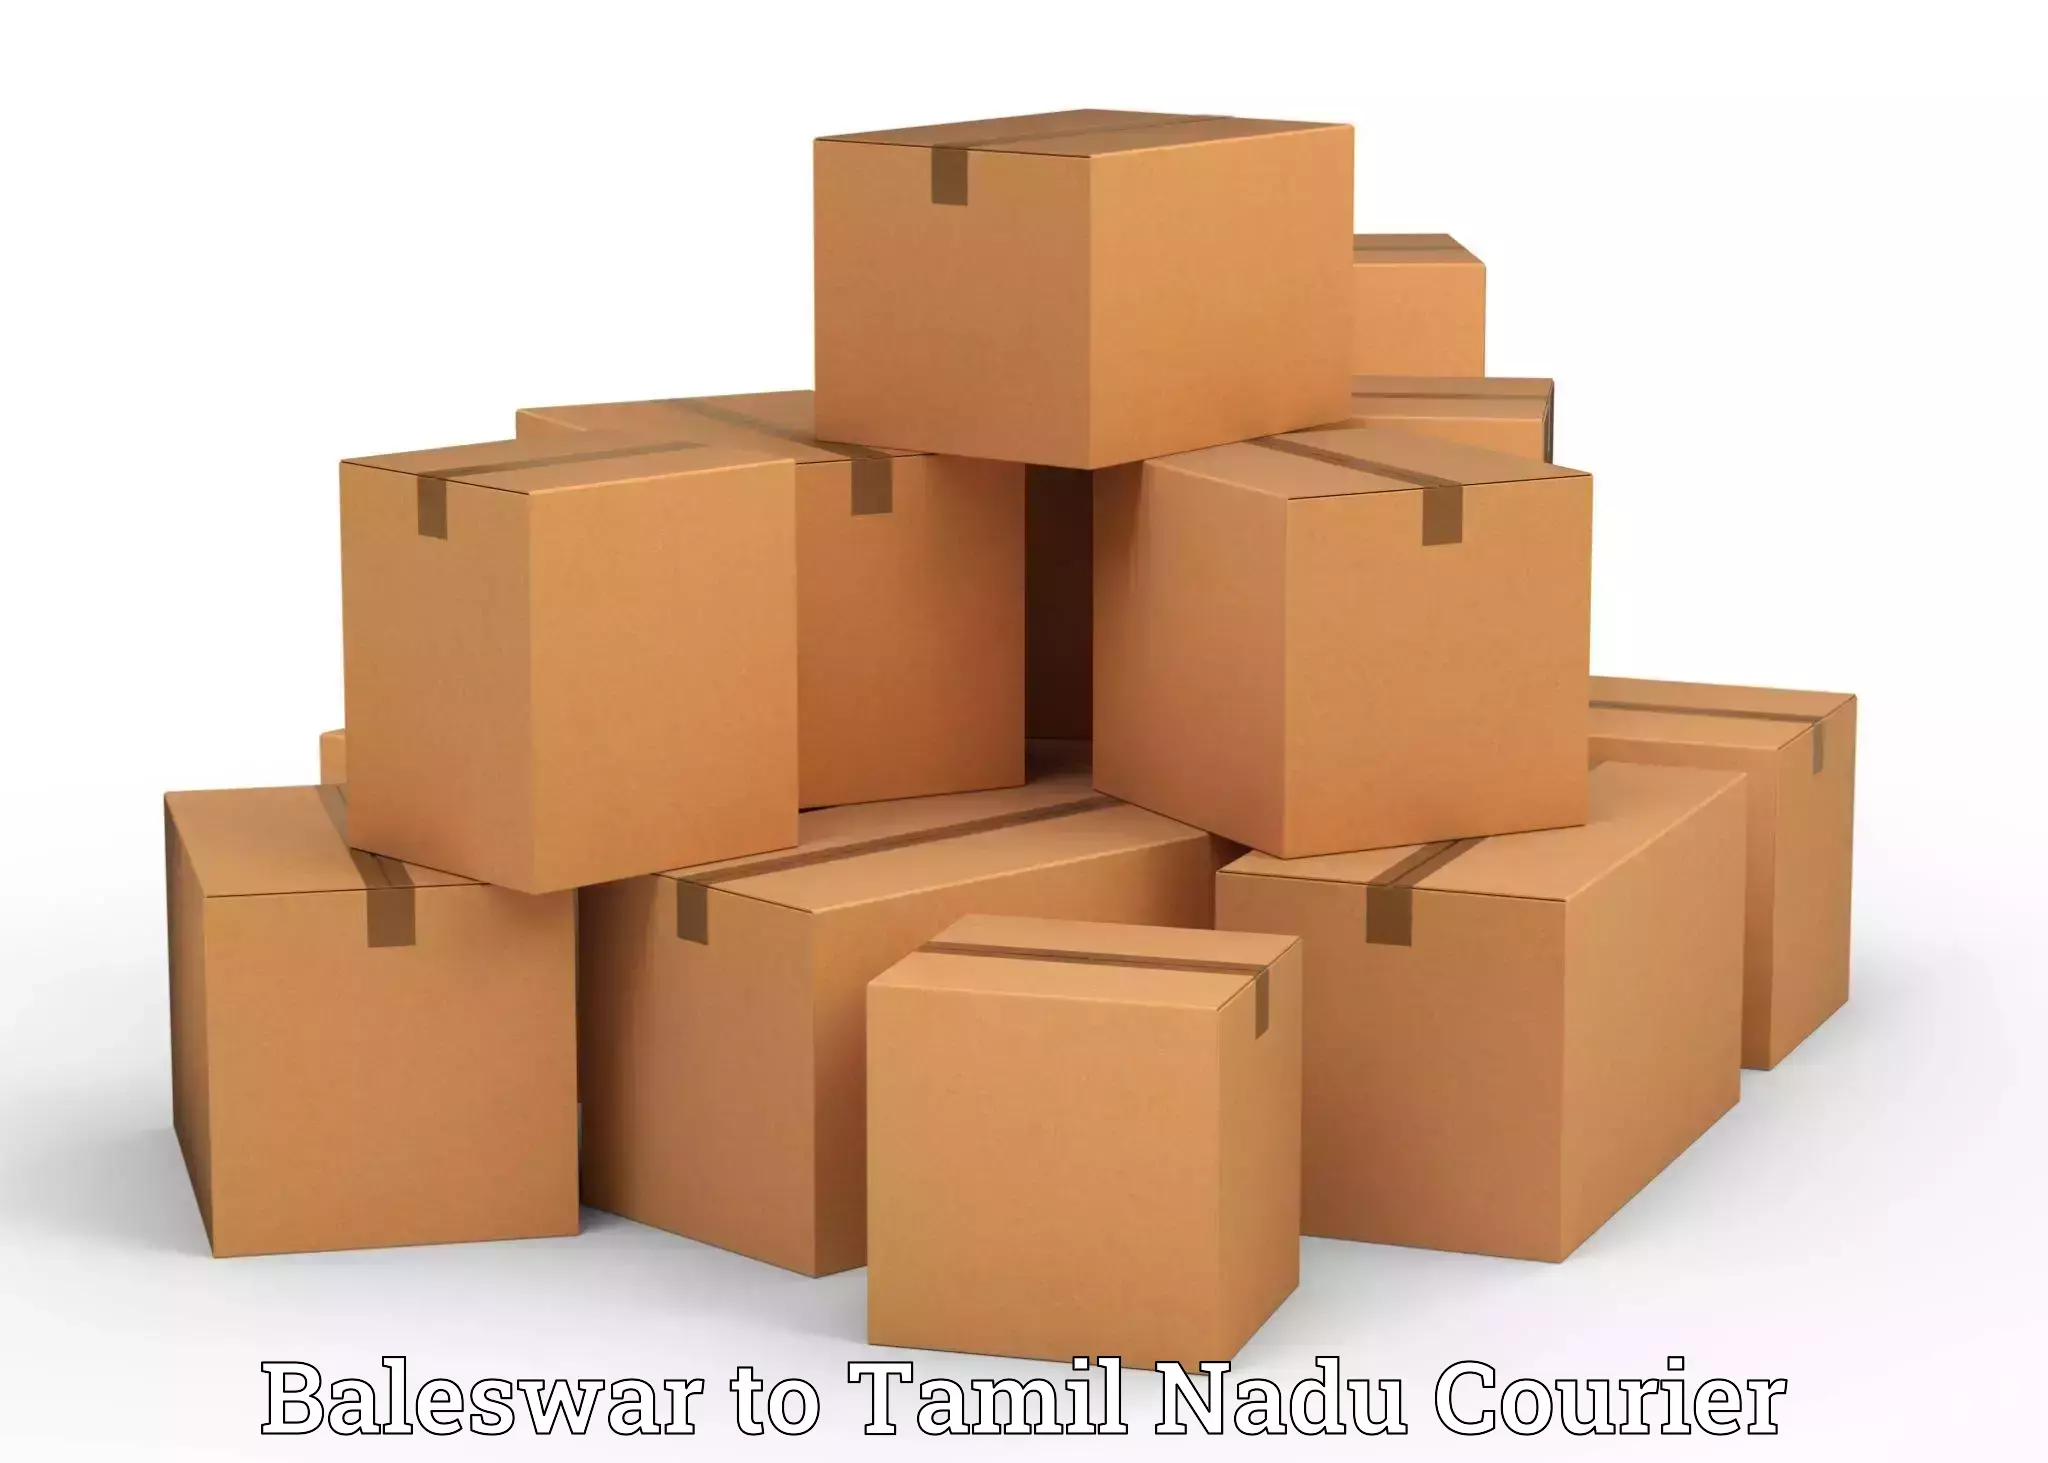 Customized relocation services in Baleswar to Kovilpatti